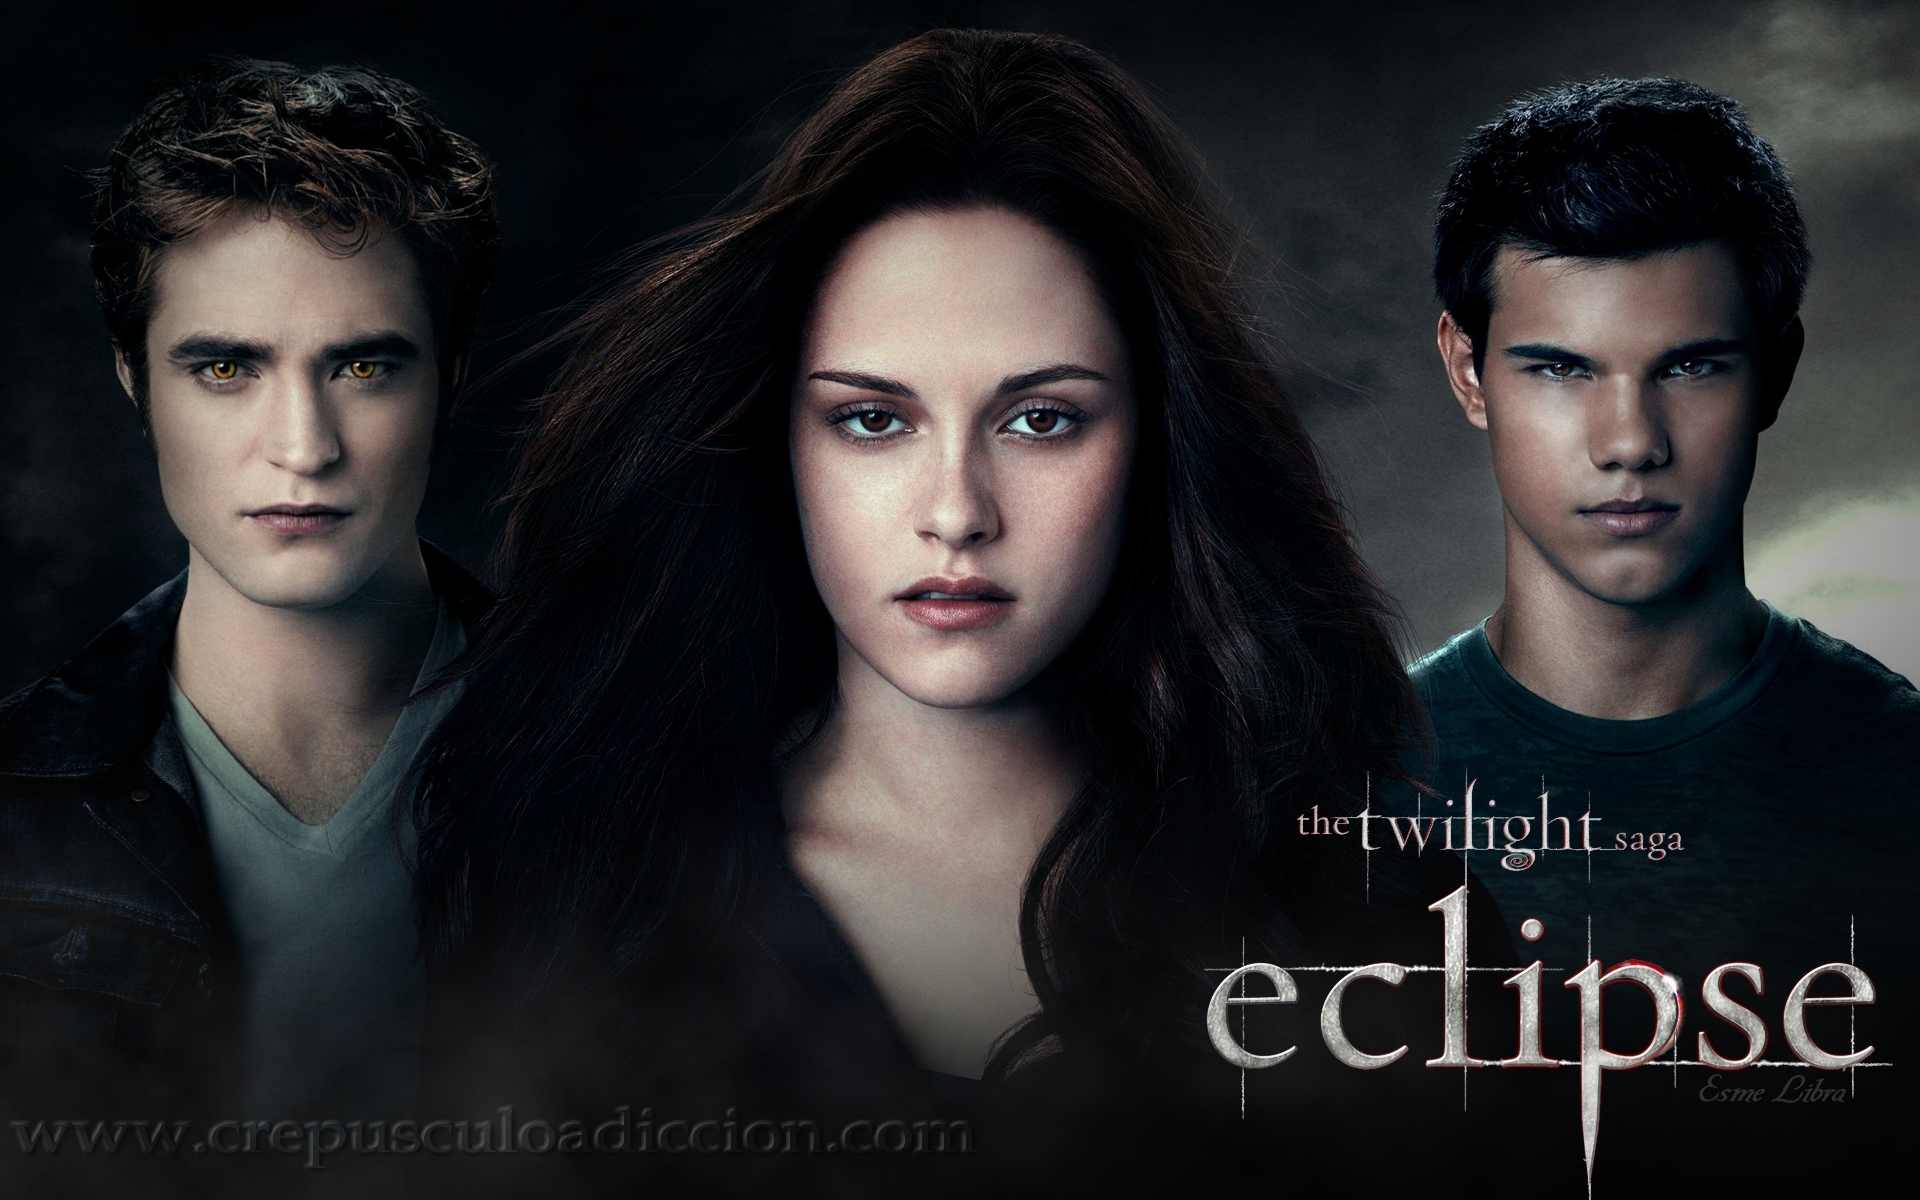 New Wallpaper Crepusculo